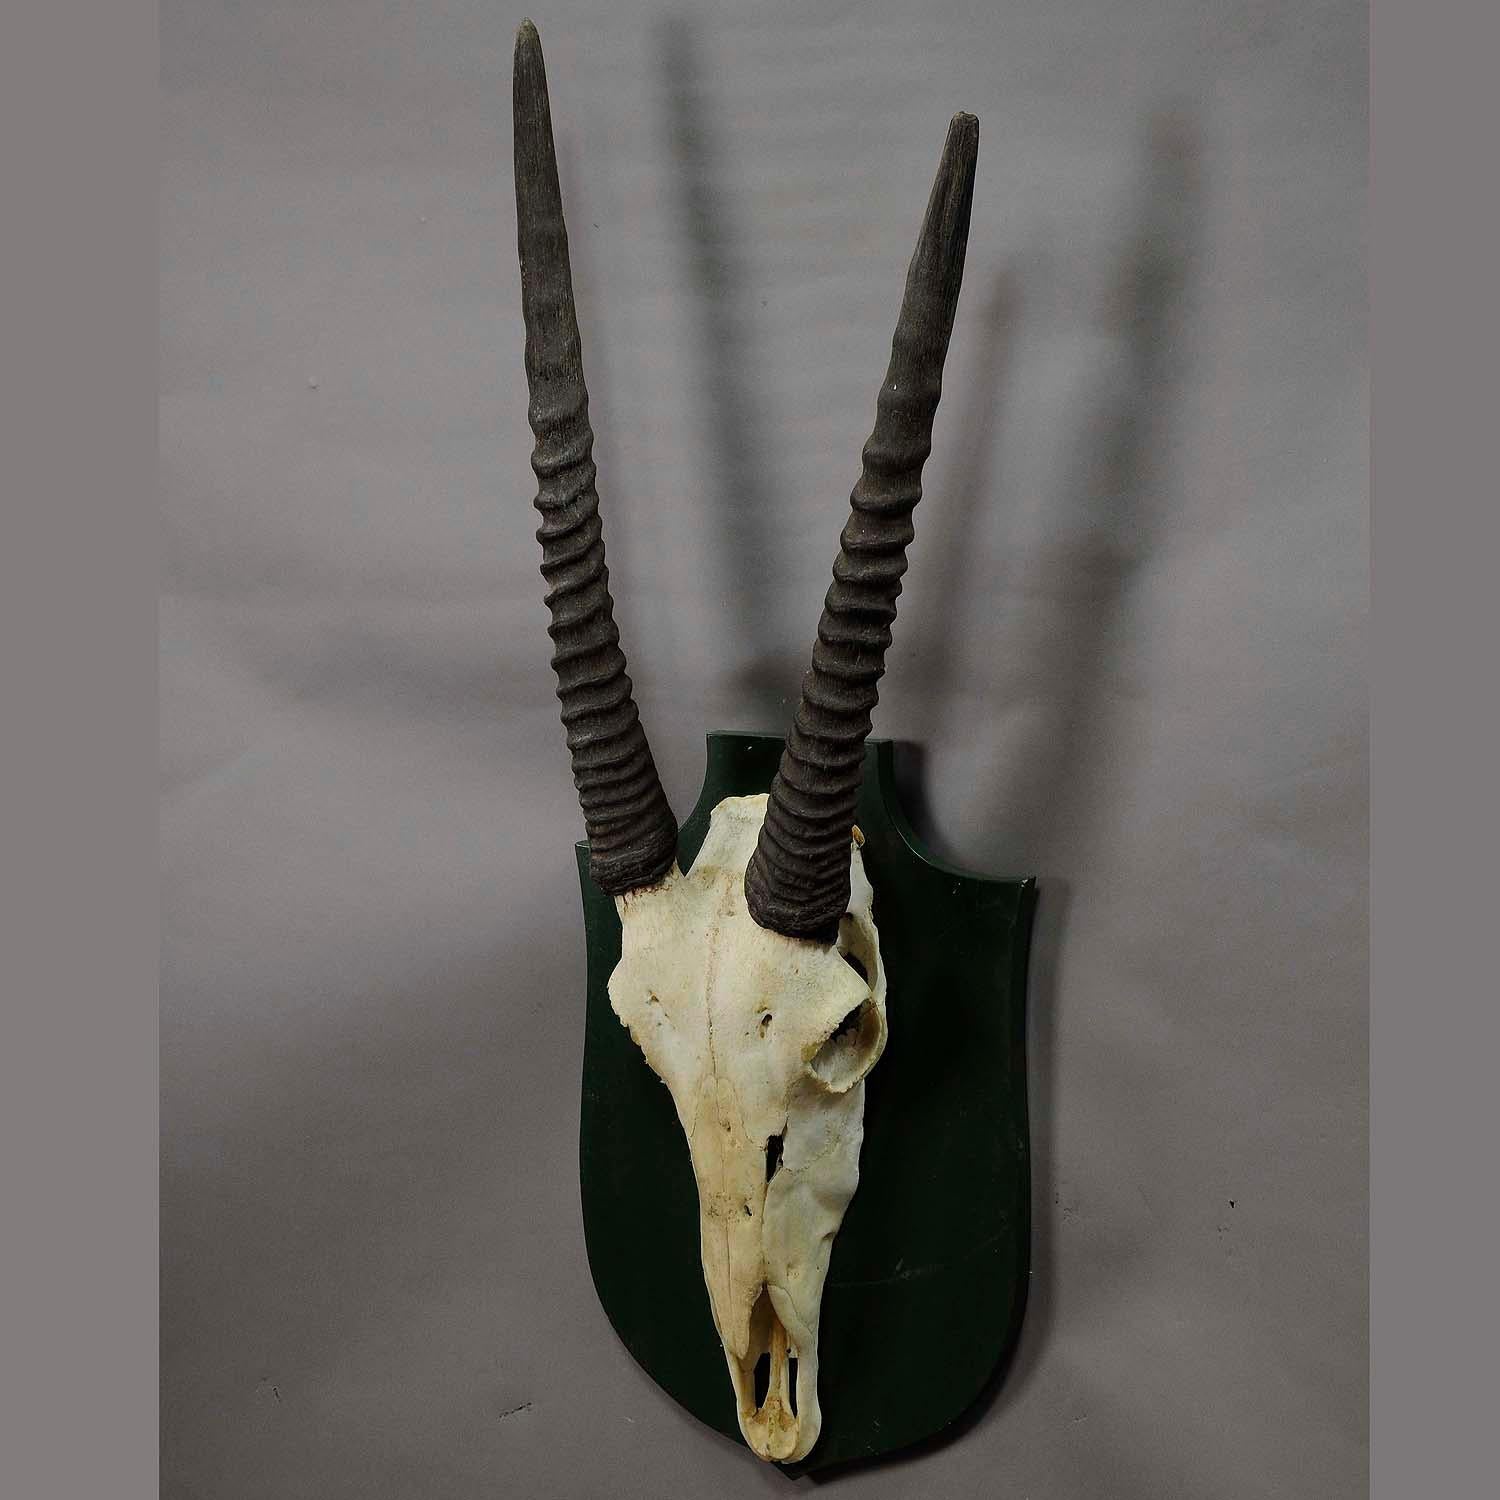 Rustic Trophy of a Oryx Anthelope from the Noble Estate Salem in South Germany